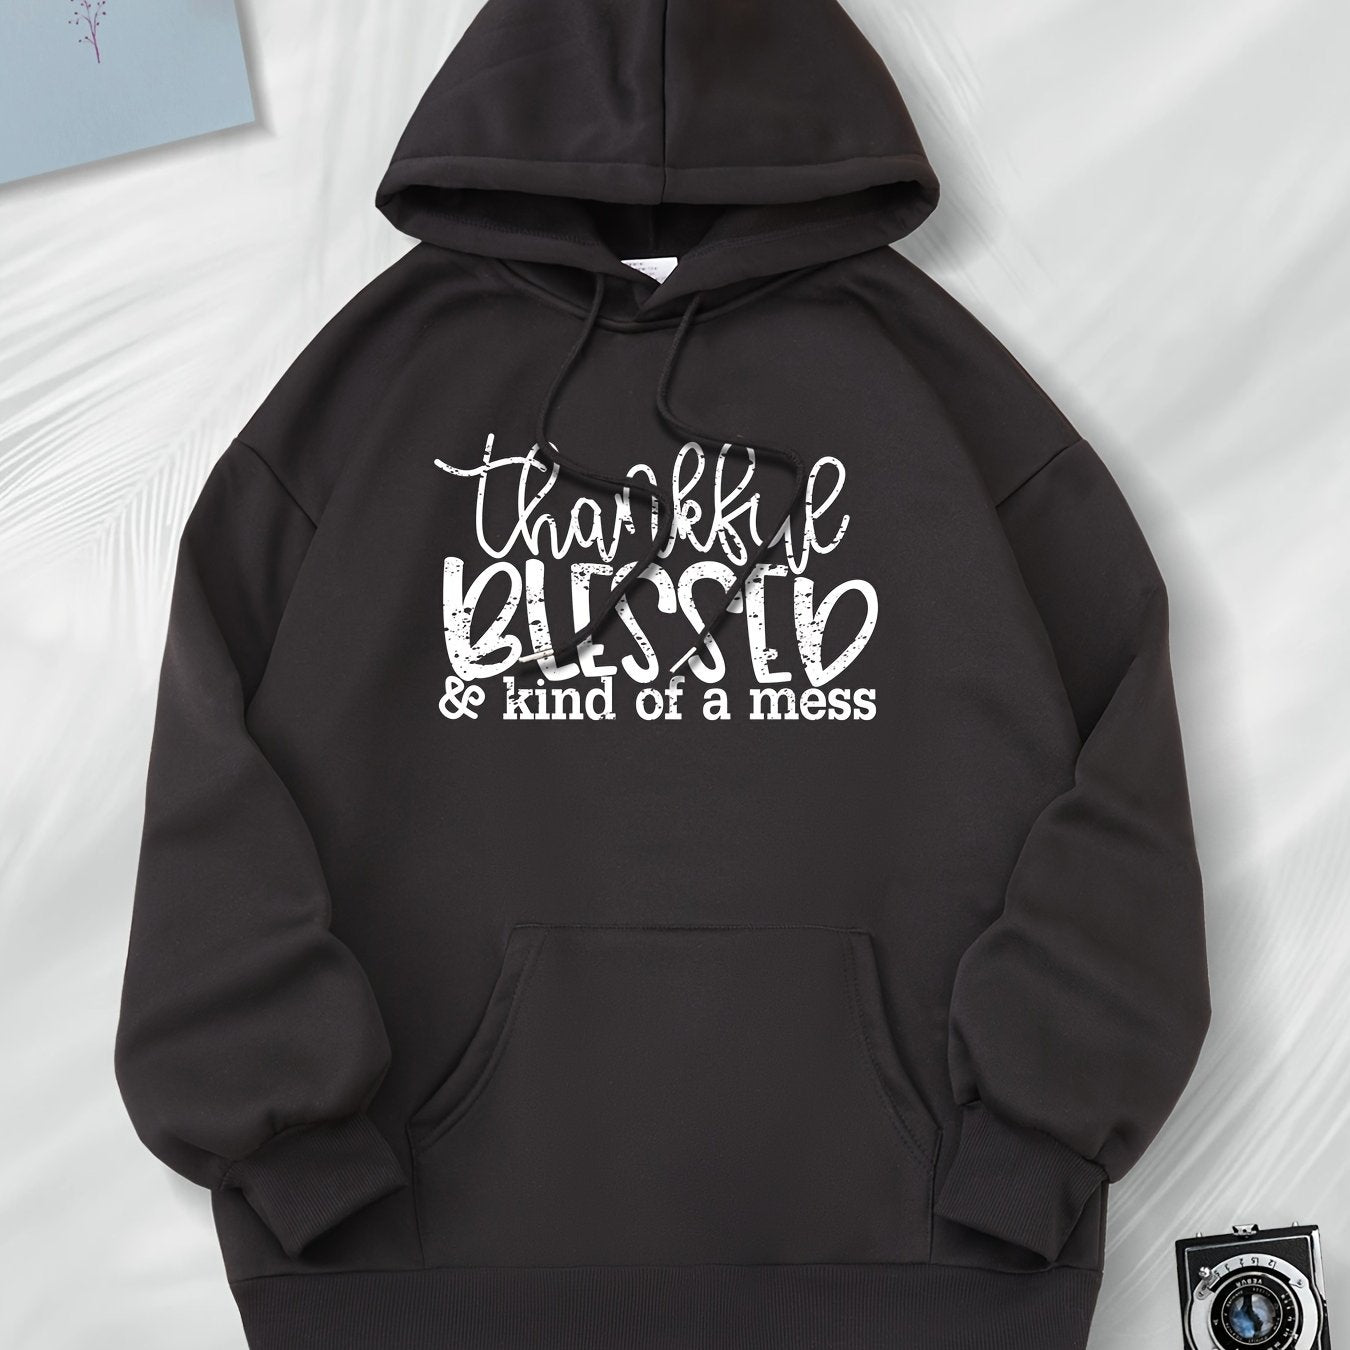 THANKFUL BLESSED & KIND OF A Mess Women's Christian Pullover Hooded Sweatshirt claimedbygoddesigns